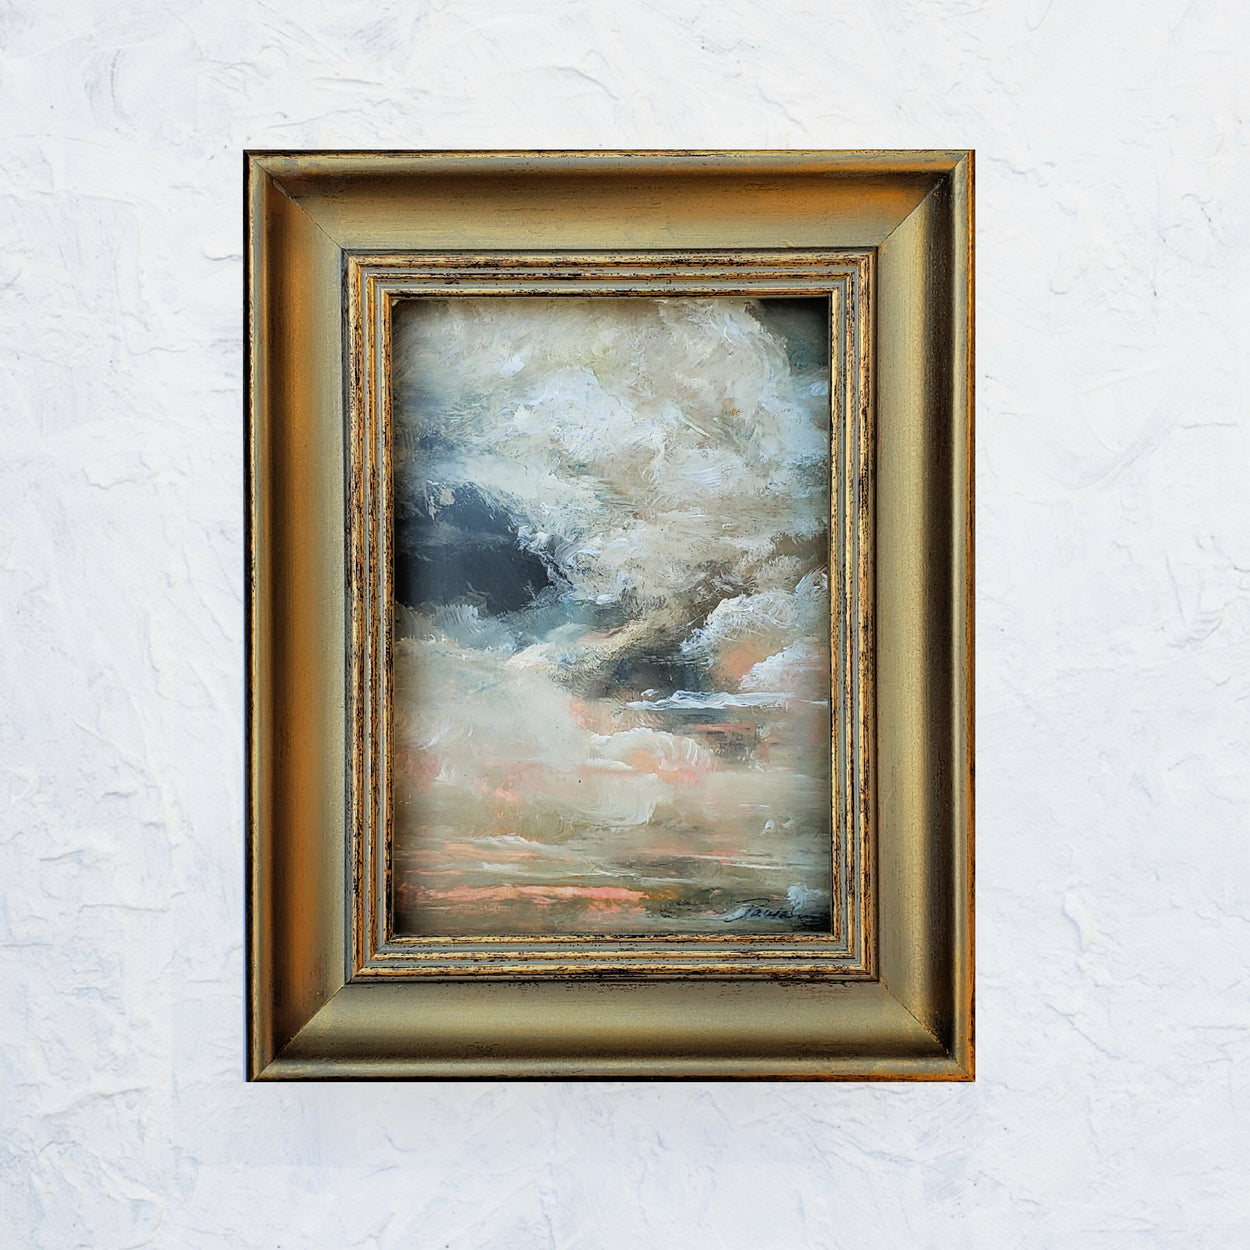 5x7 Oil on painting on oil paper..puffy clouds painted in colorse of peach and cream and dark gray blue with golden tones. Framed in vintage like gold frame.